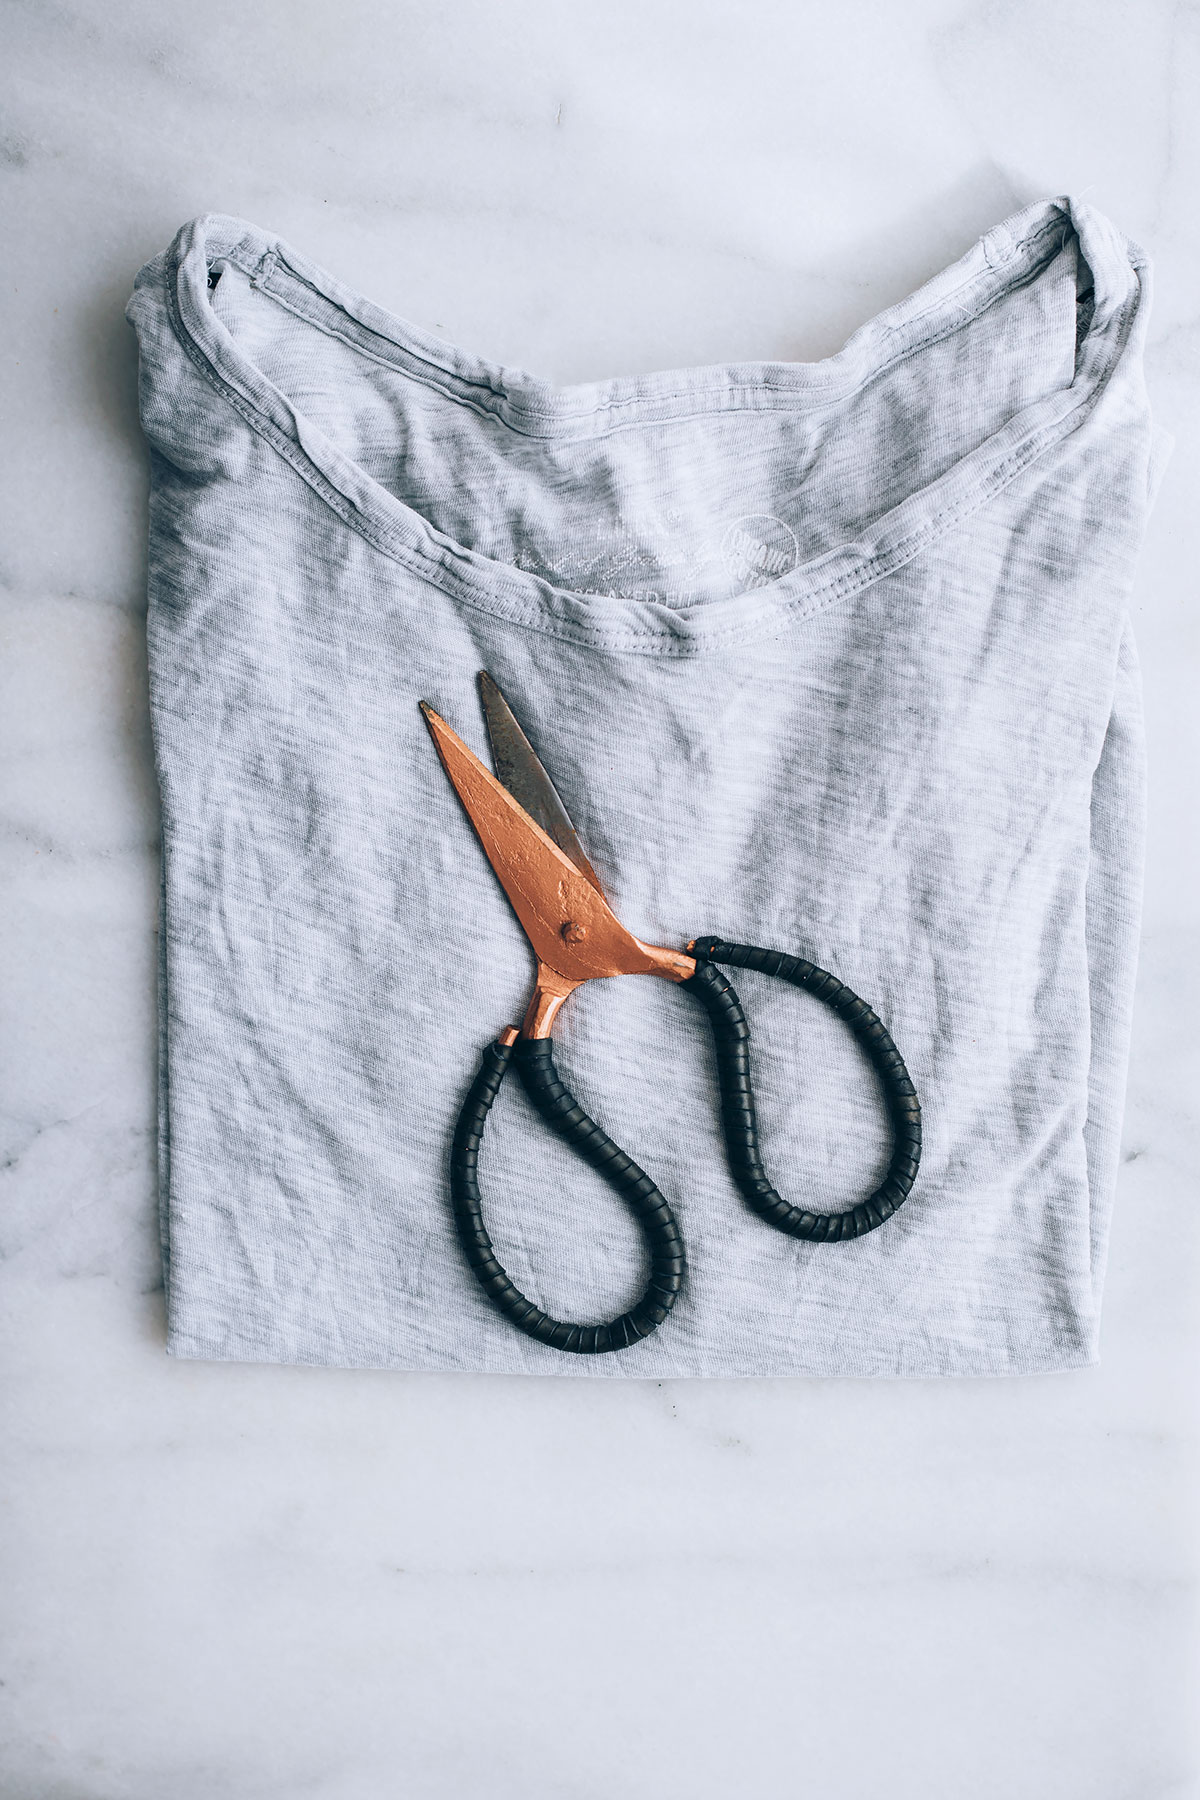 How to Make Reusable T-shirt Wipes